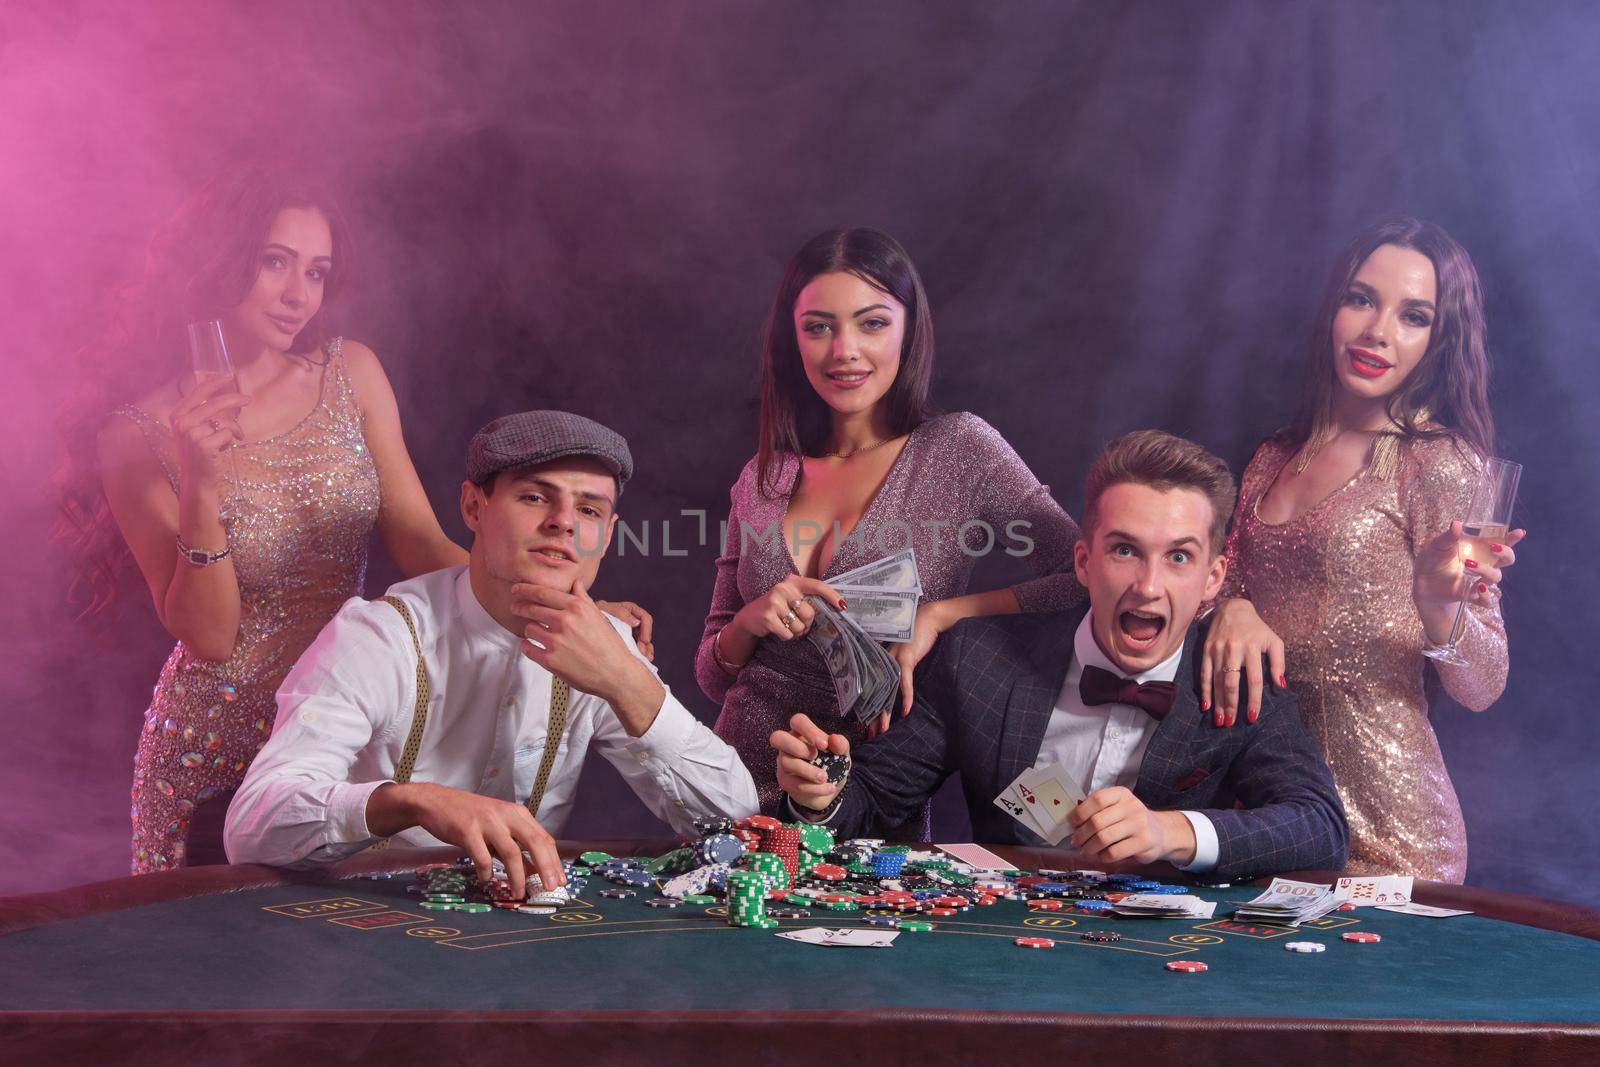 Buddies playing poker at casino, at table with stacks of chips, money, cards on it. Happy about win, drinking champagne, smiling. Black, smoke background, colorful backlights. Gambling. Close-up.